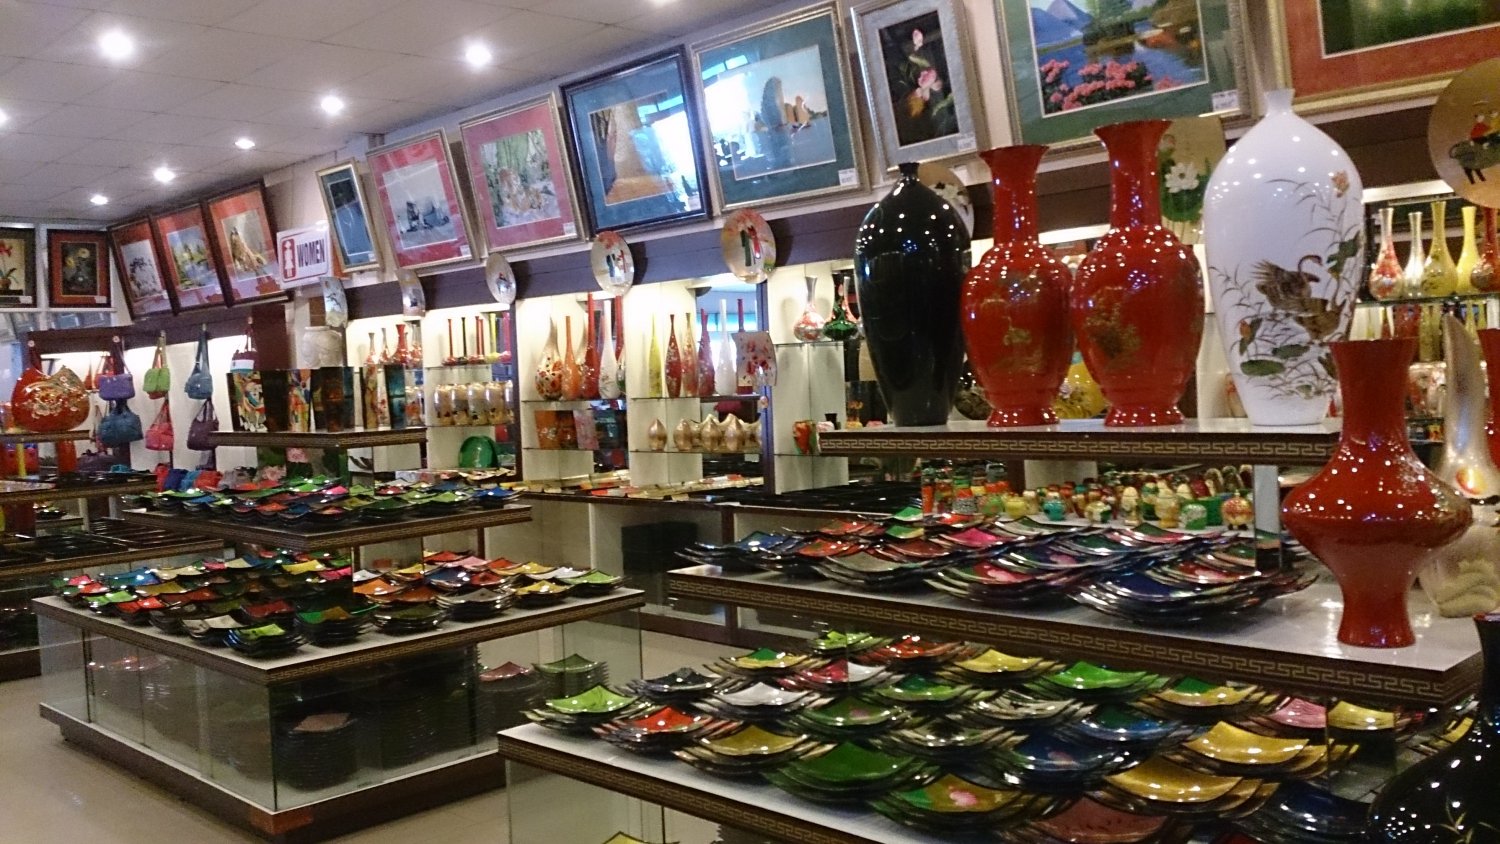 Vietnam Souvenirs: What to Bring Back Home